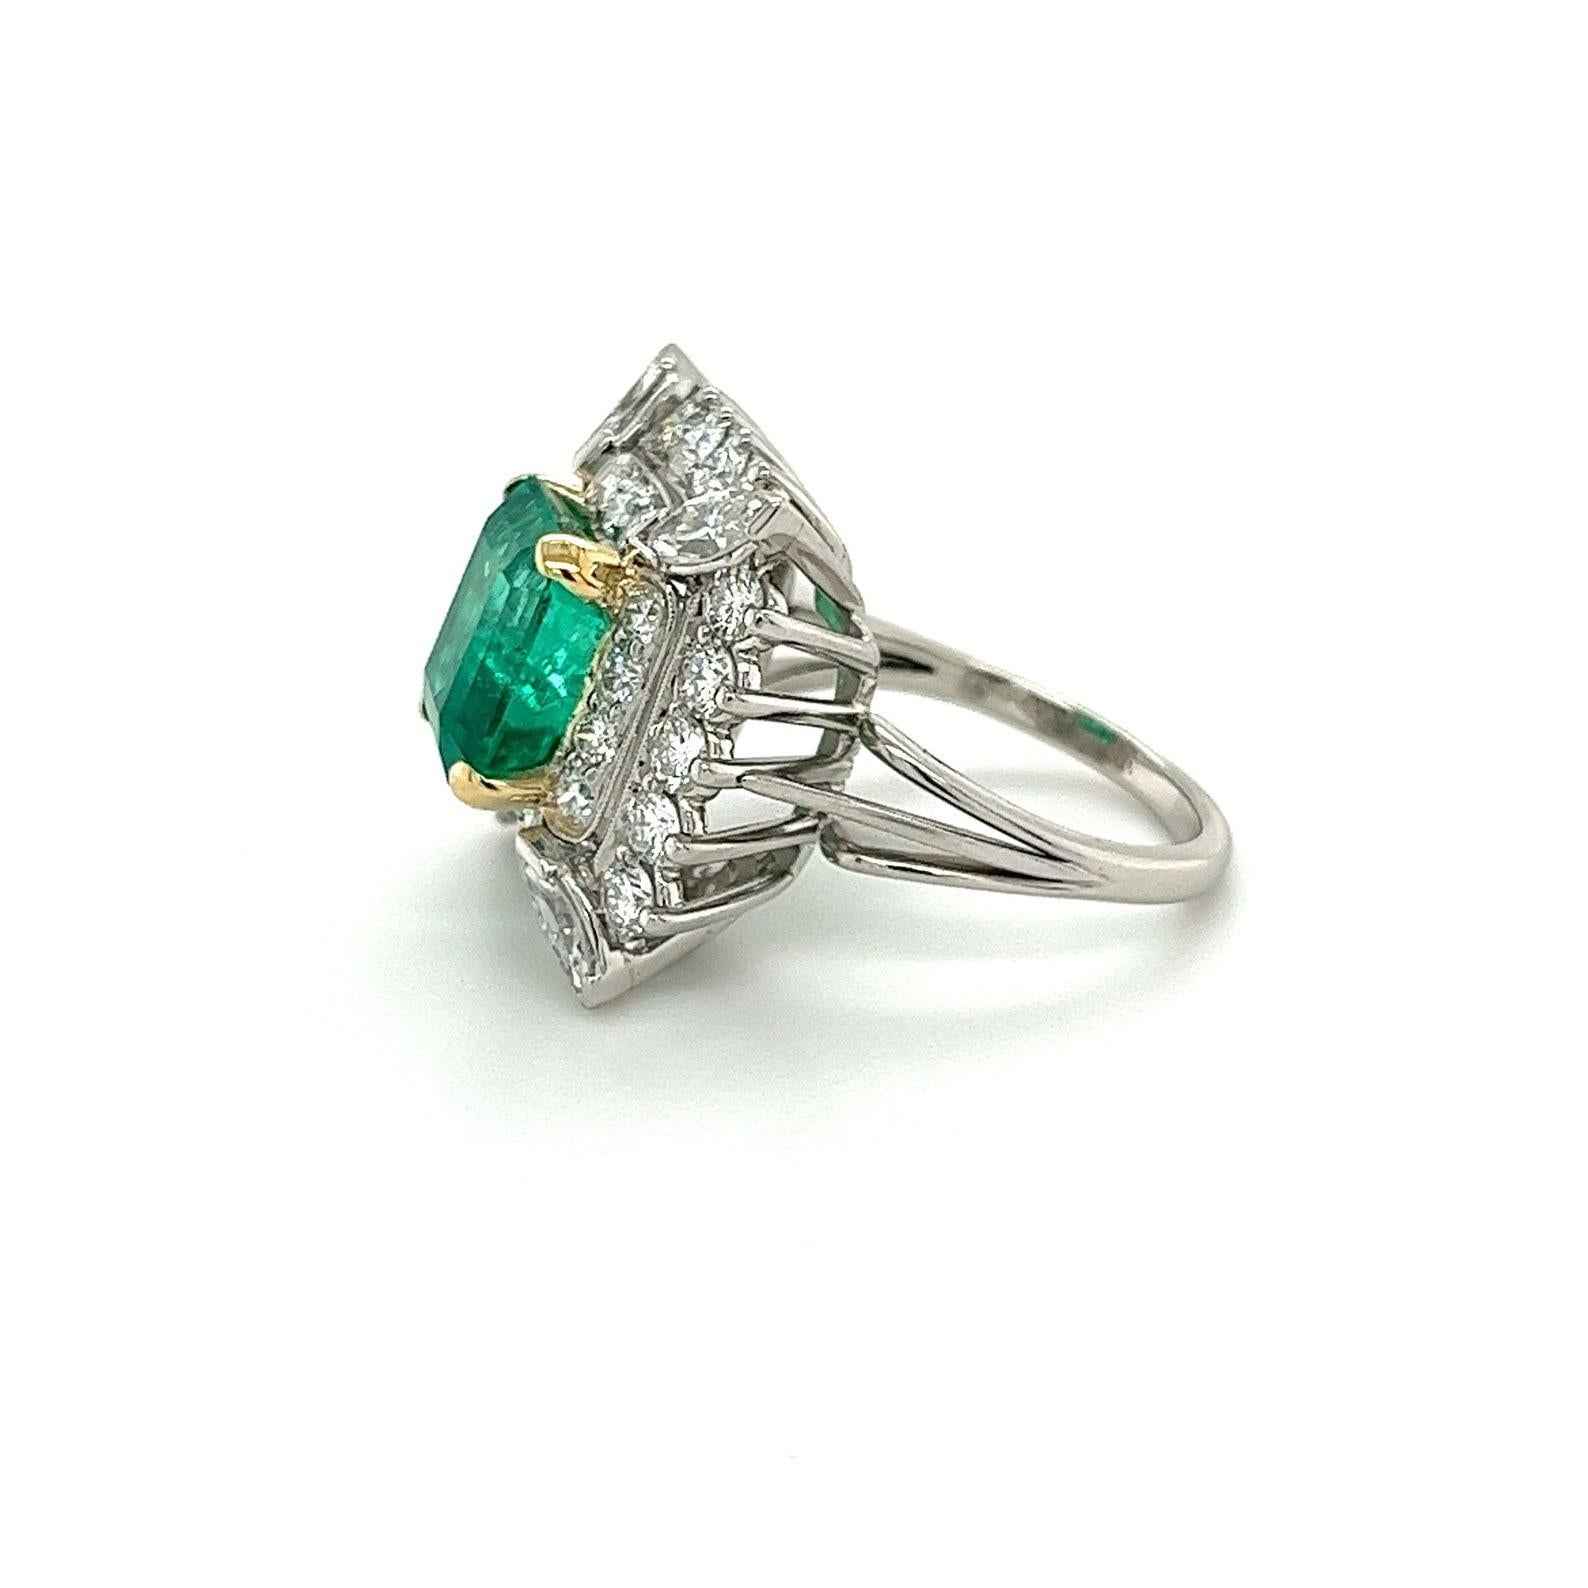 3.31 Carat Colombian Emerald & Diamond Halo Cocktail Ring in Platinum Setting For Sale 3